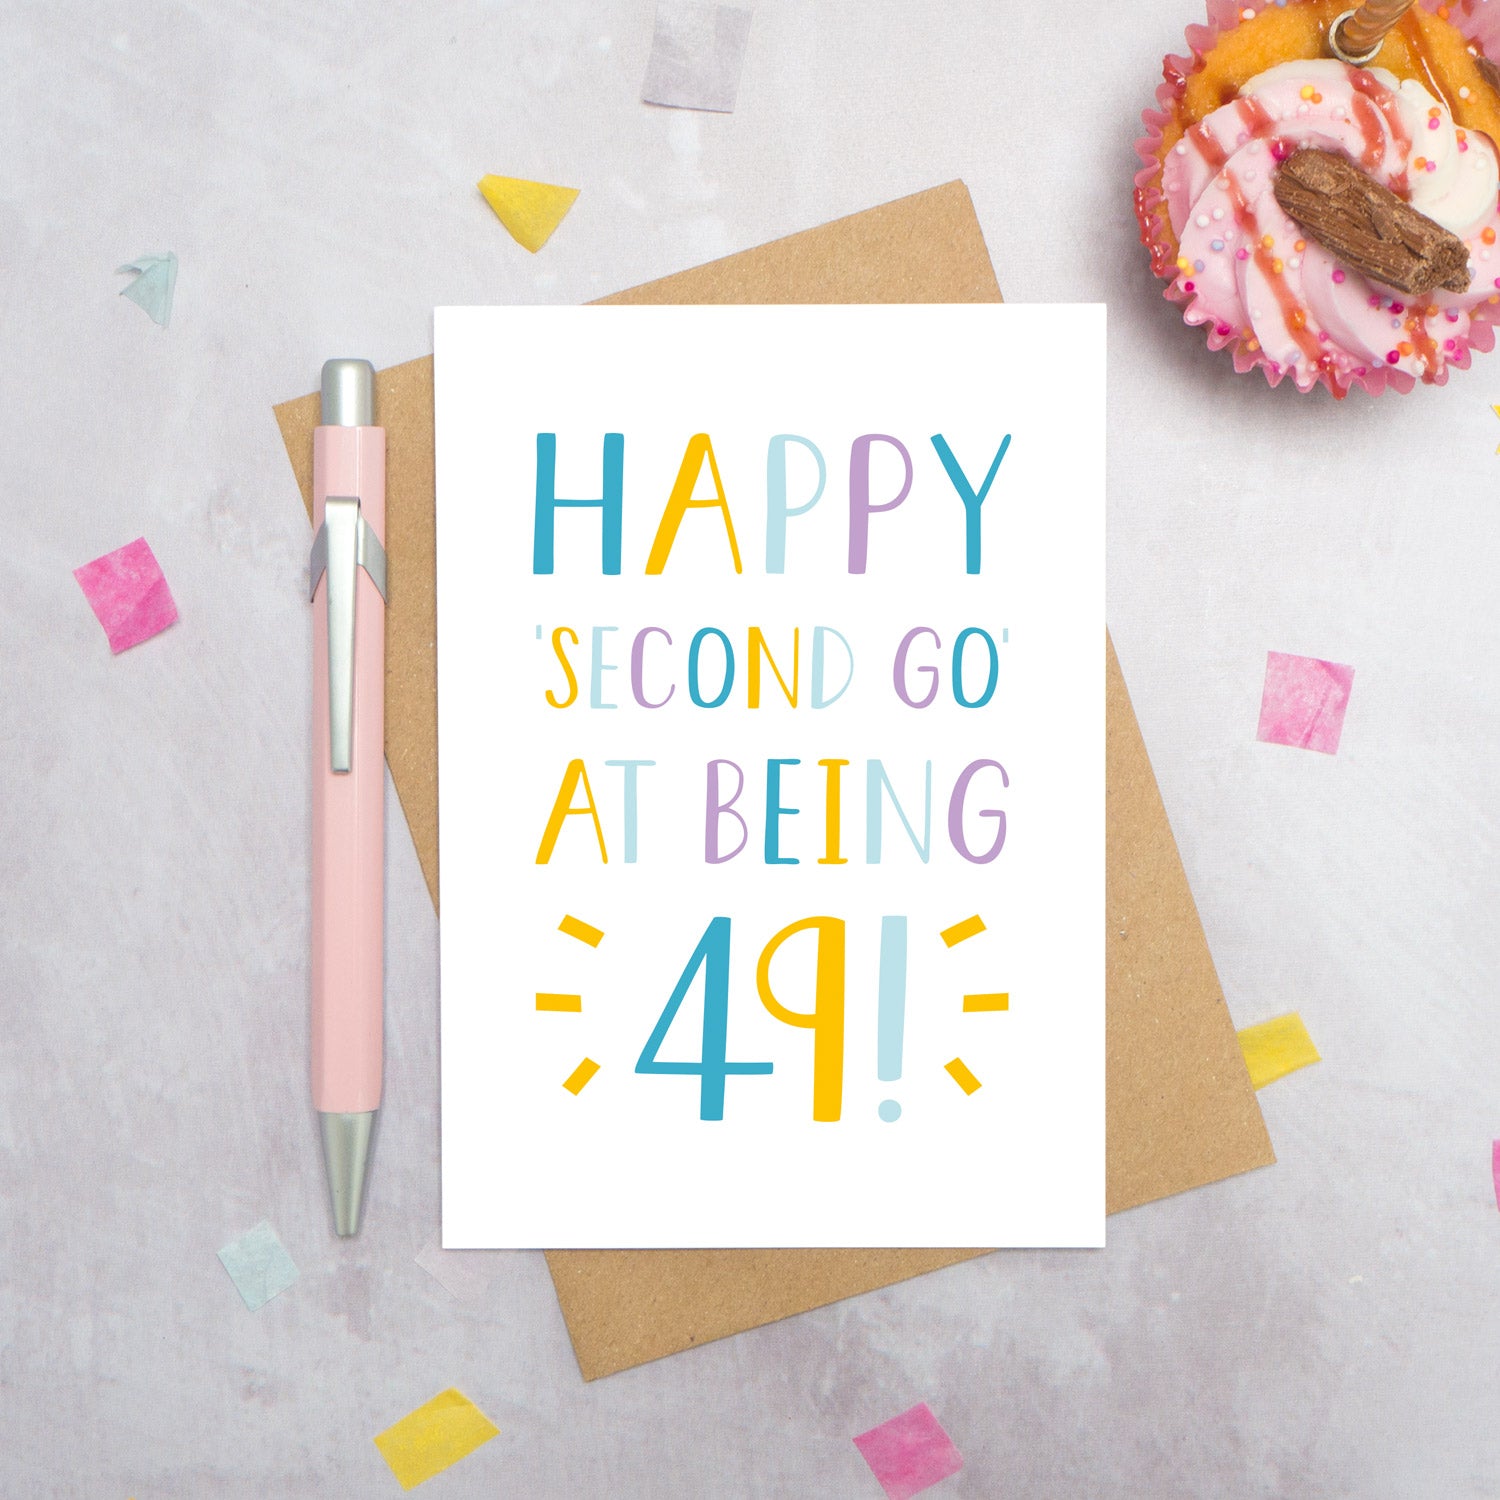 Happy second go at being 49 - milestone age card in blue, yellow and purple photographed on a grey background surrounded by a cupcake, pen and confetti.